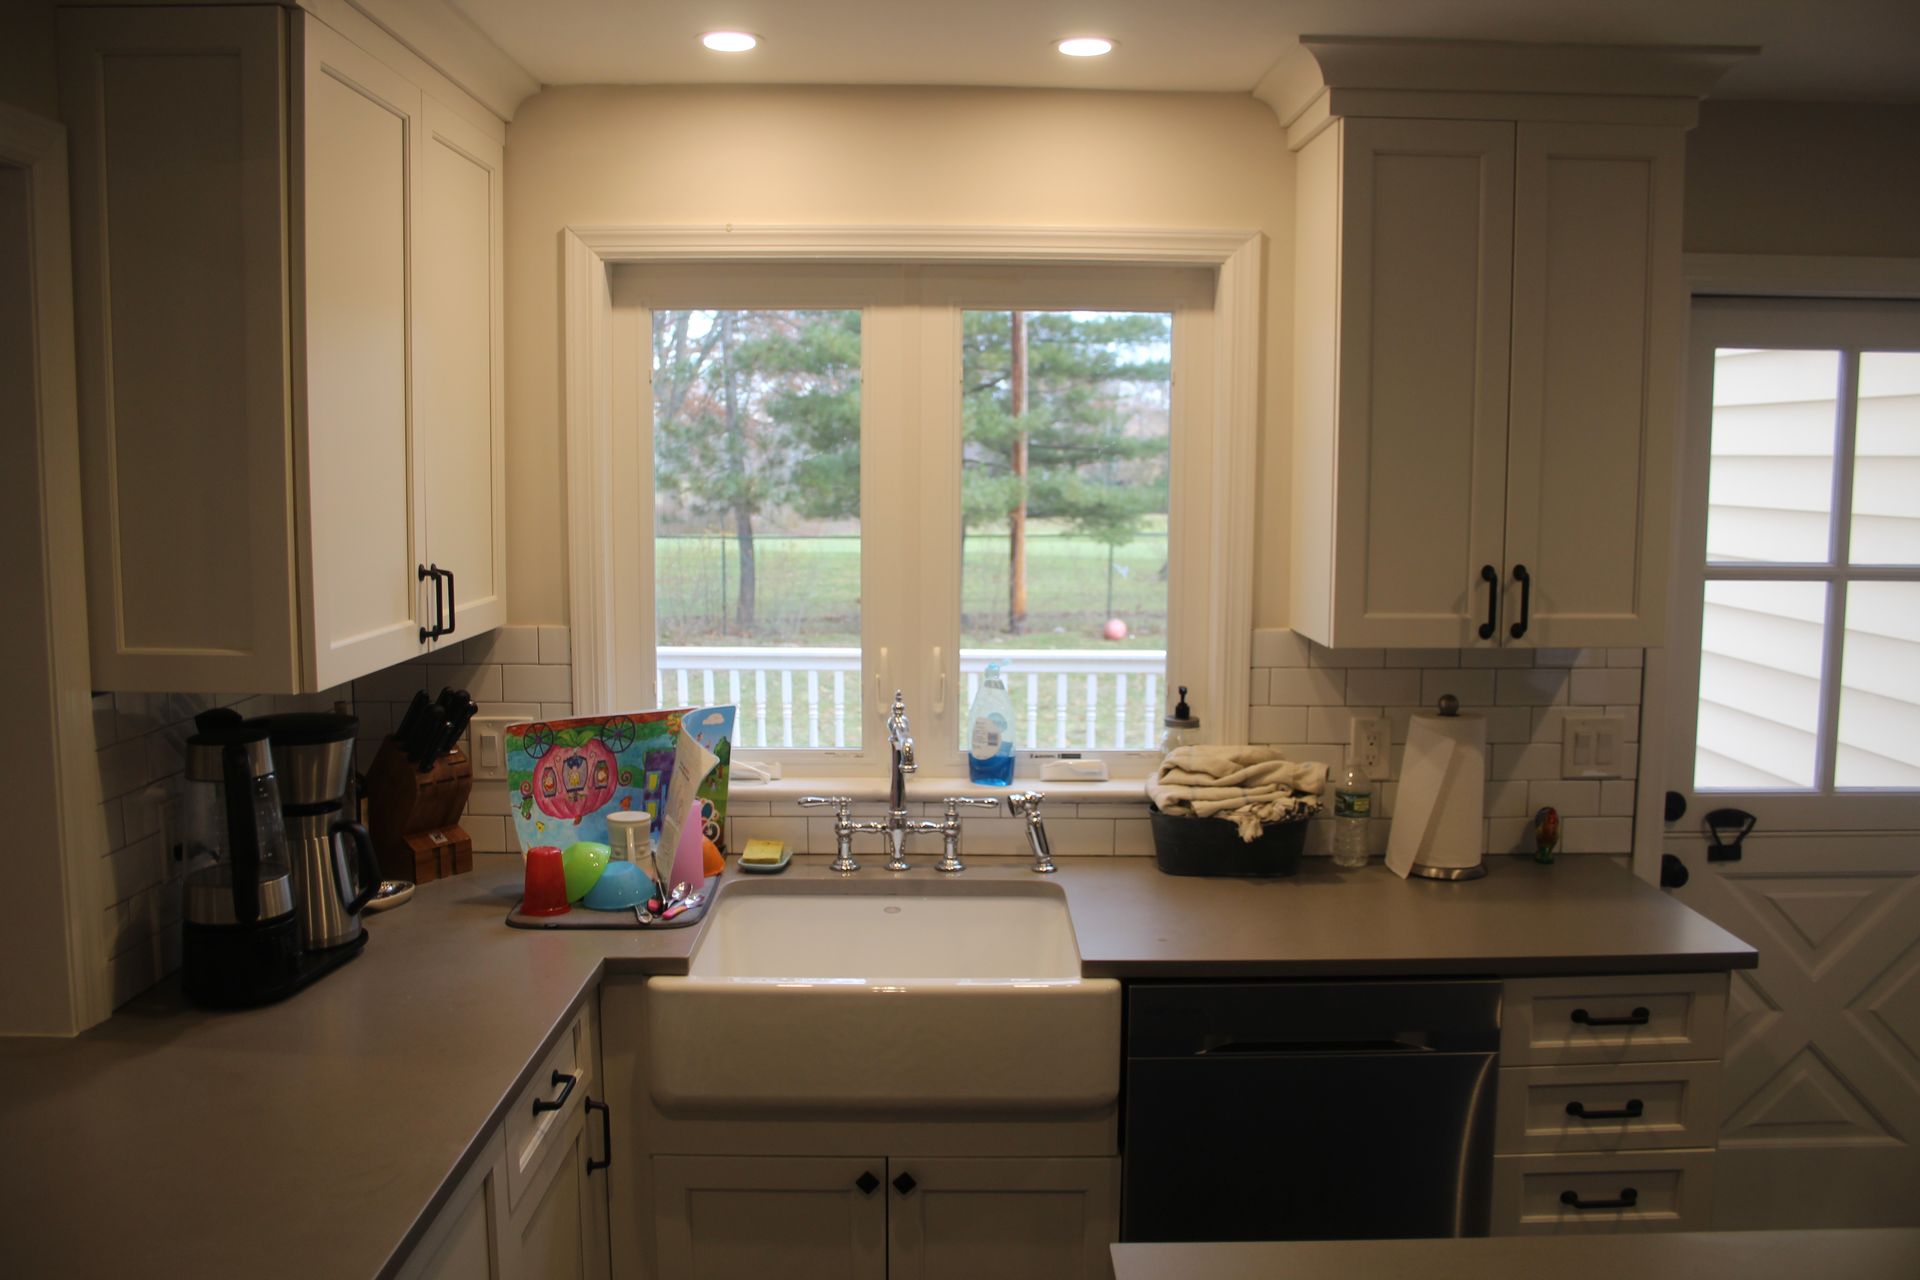 A kitchen with white cabinets, a sink, a dishwasher, and a window.